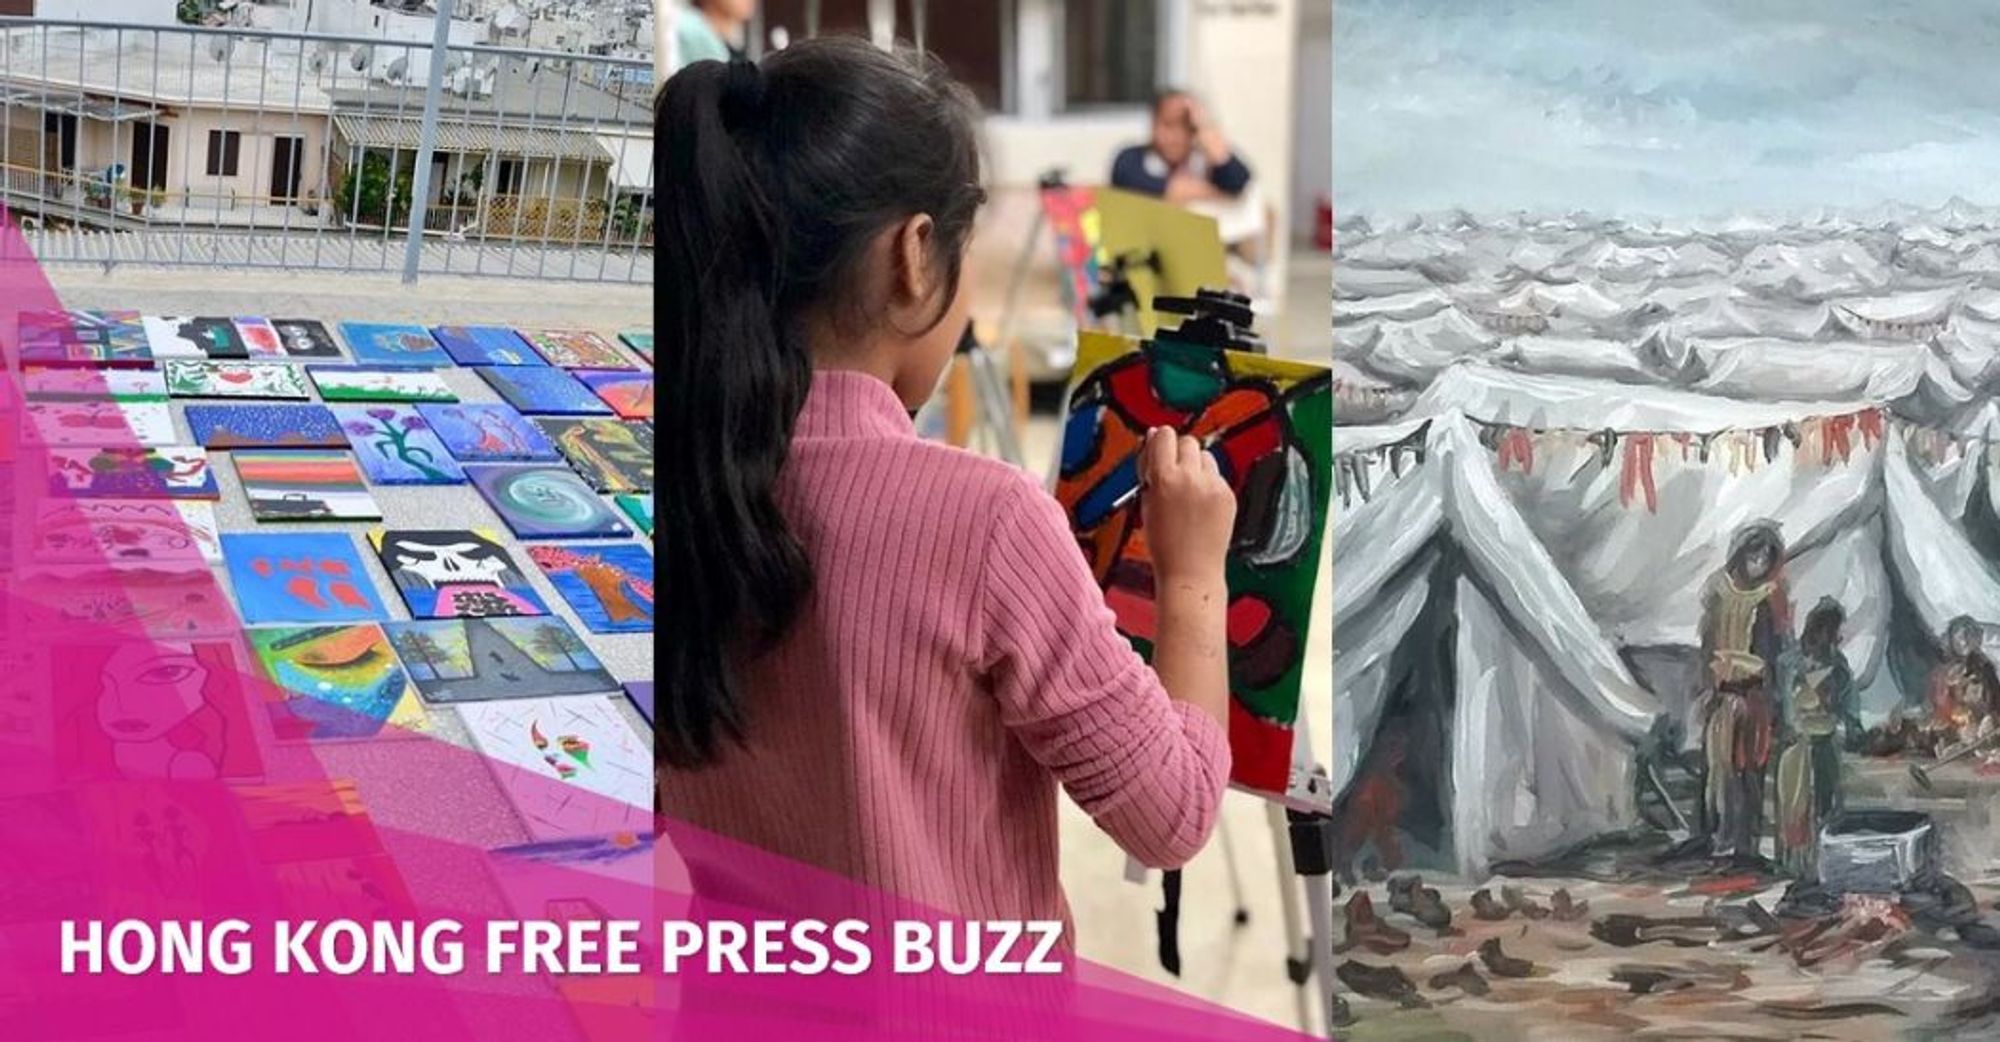 Event: Mini Acts for the Greater Good brings artwork by refugees from around the world to Hong Kong | Hong Kong Free Press HKFP